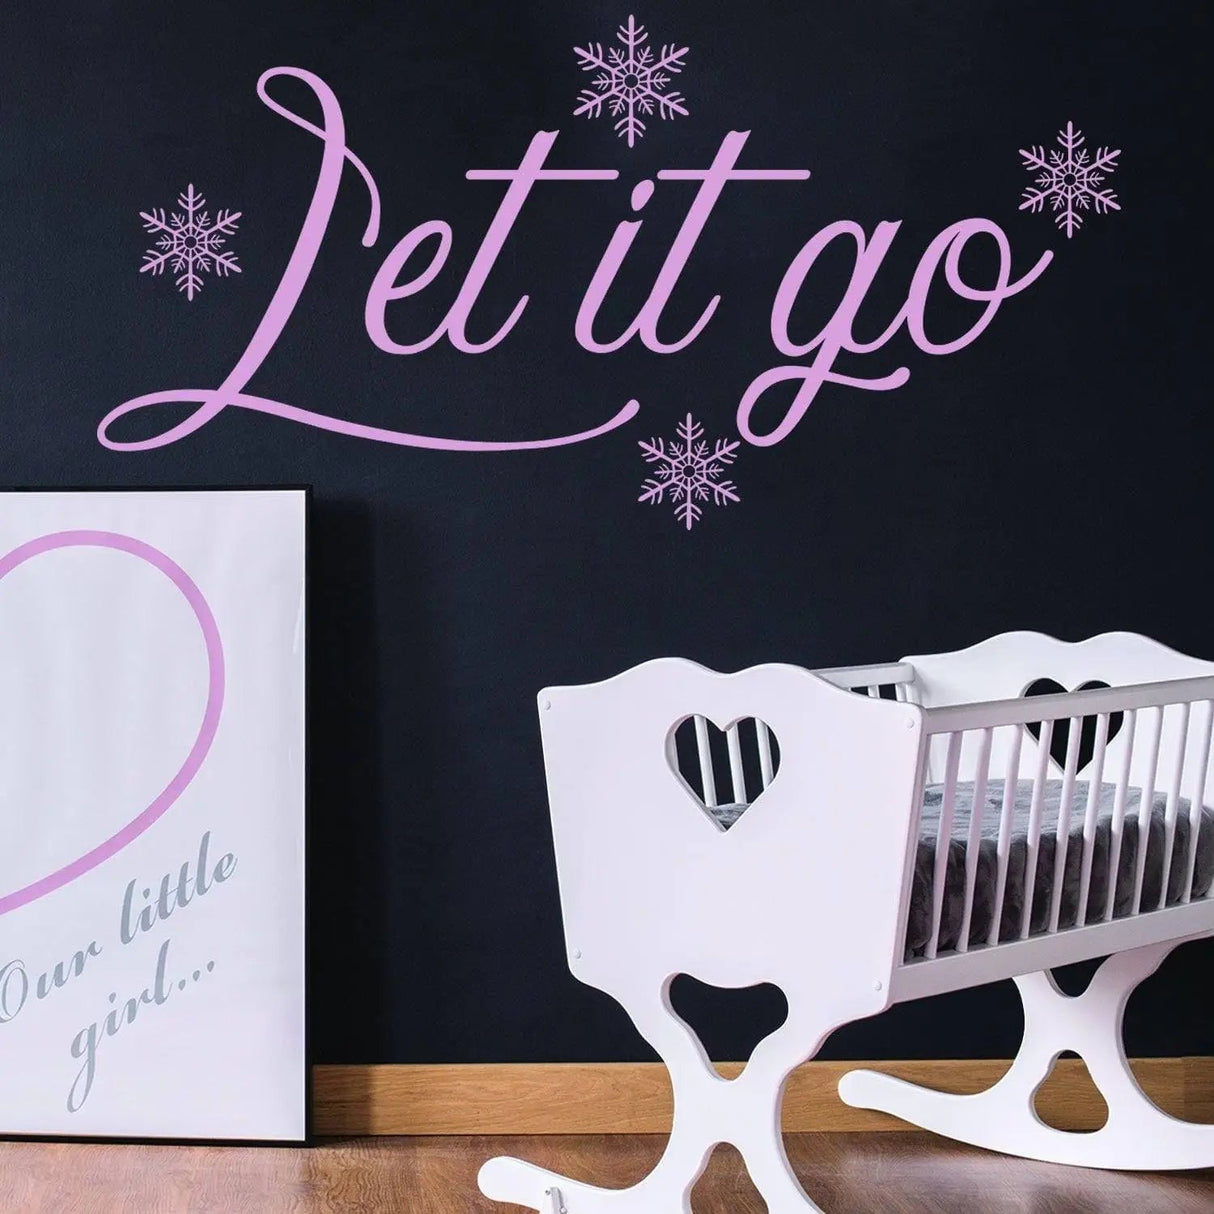 Let It Go Snowflakes Wall Sticker Decal Decor for Kids Room Girls